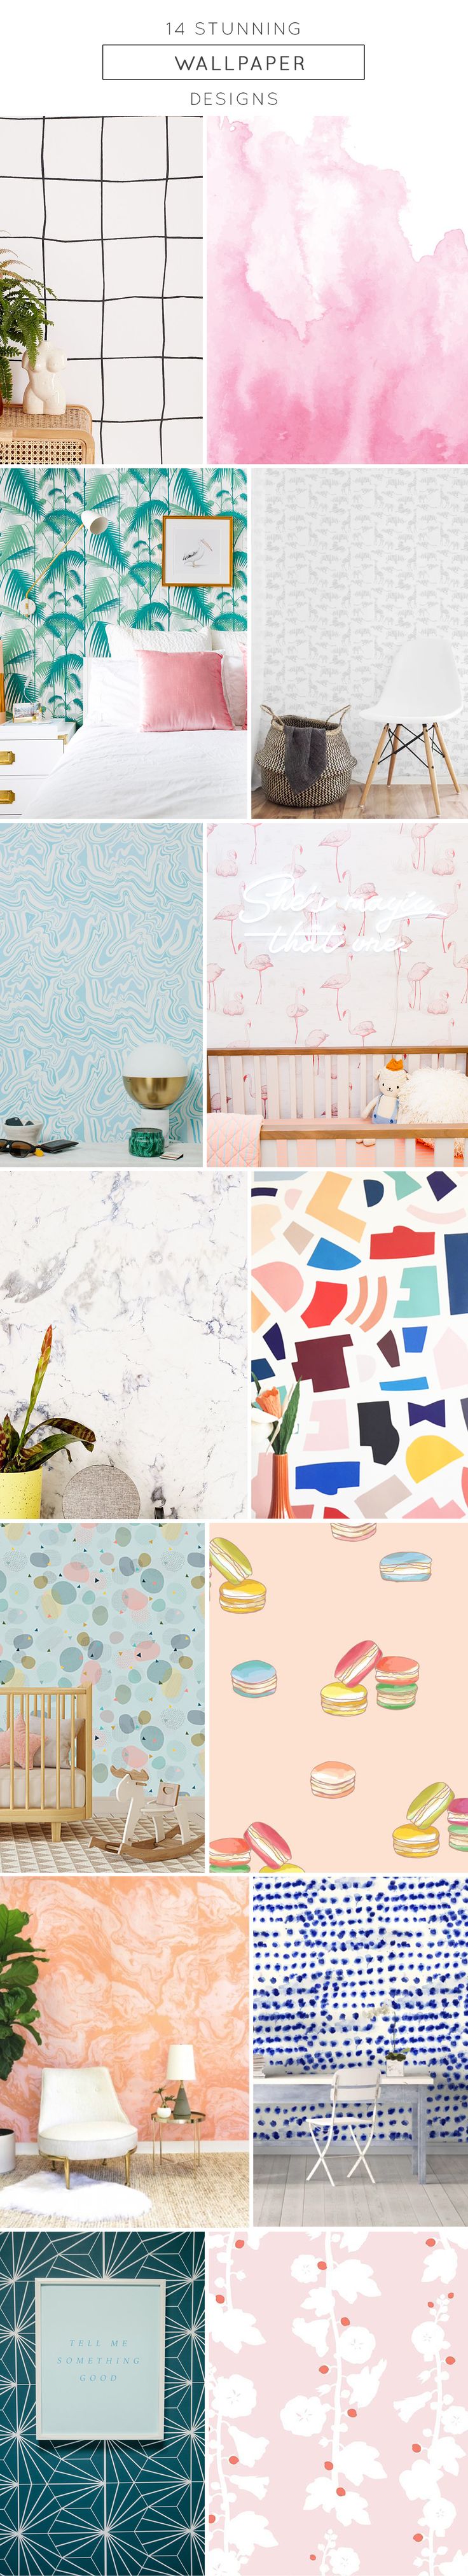 As interior design lovers, we’re always looking at how people use color, furni...